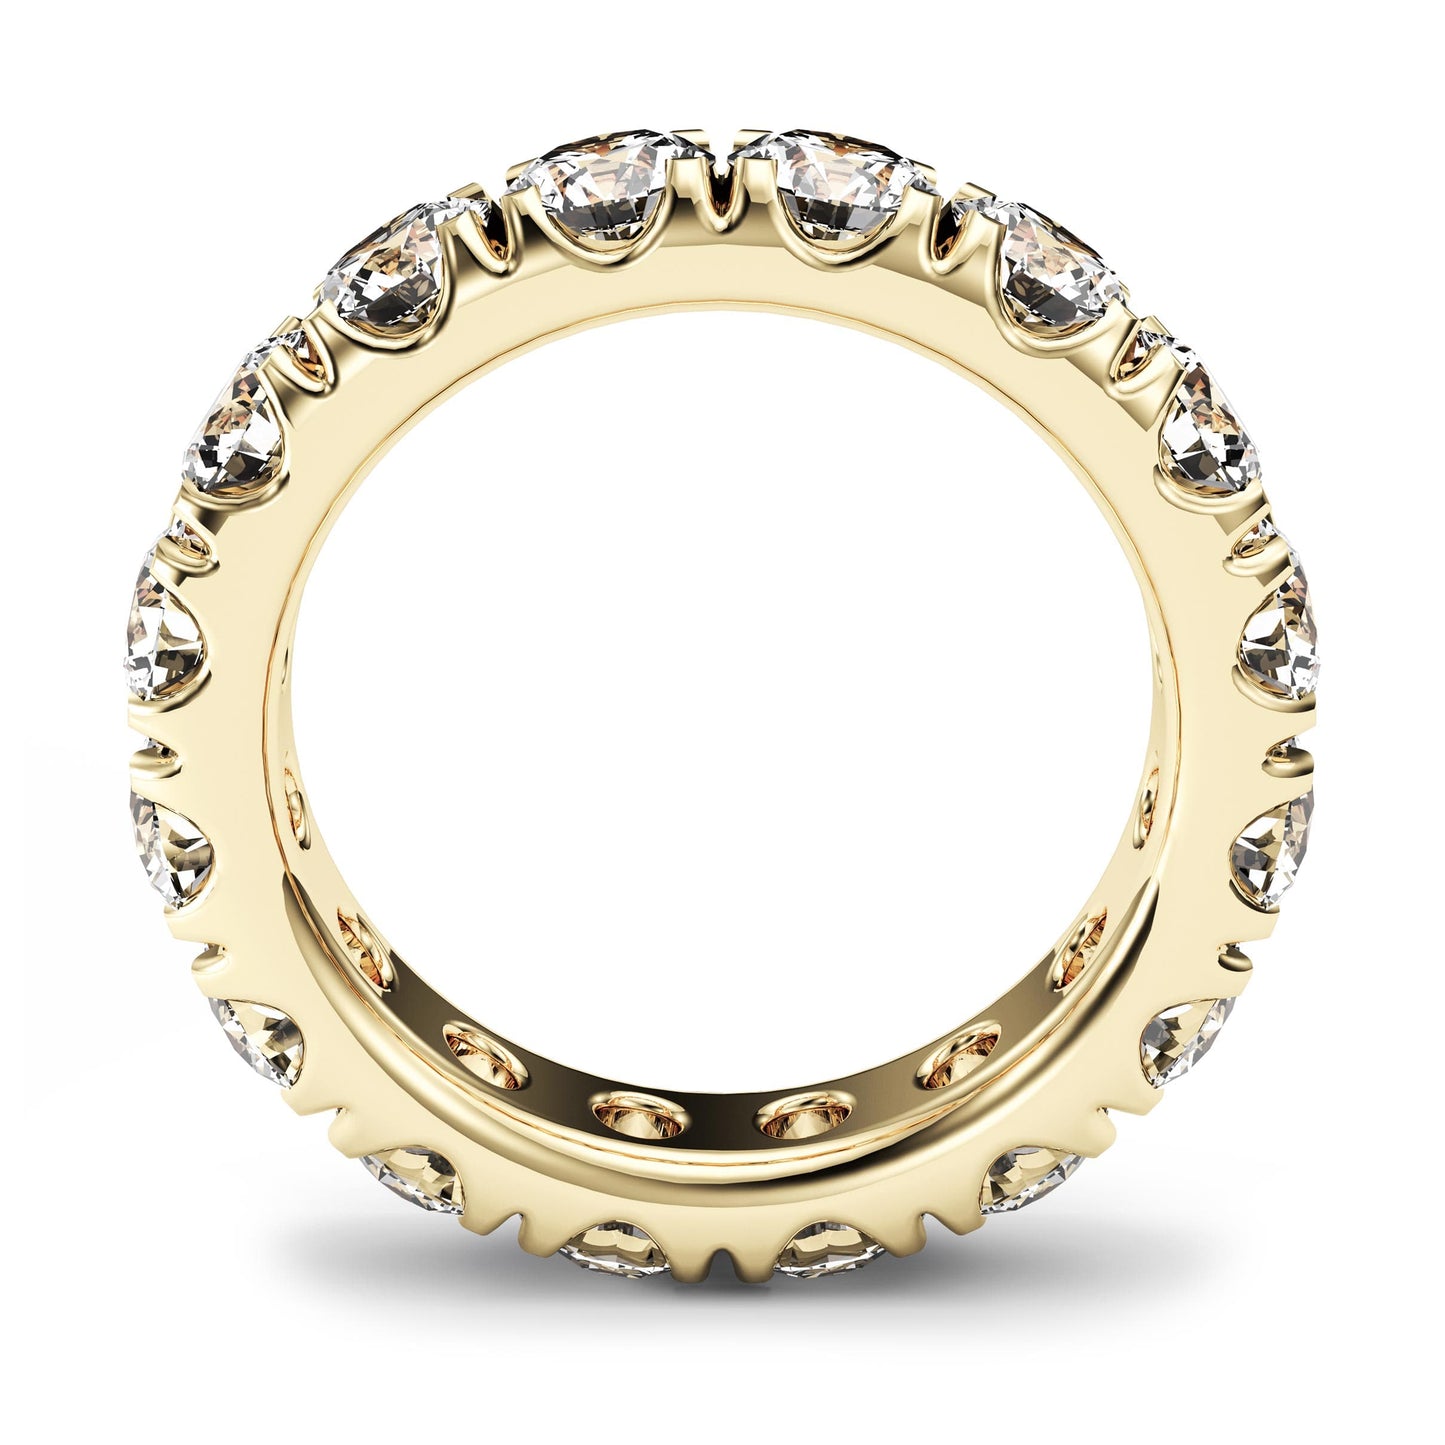 4ct French Pave Diamond Eternity Band in 14k Gold